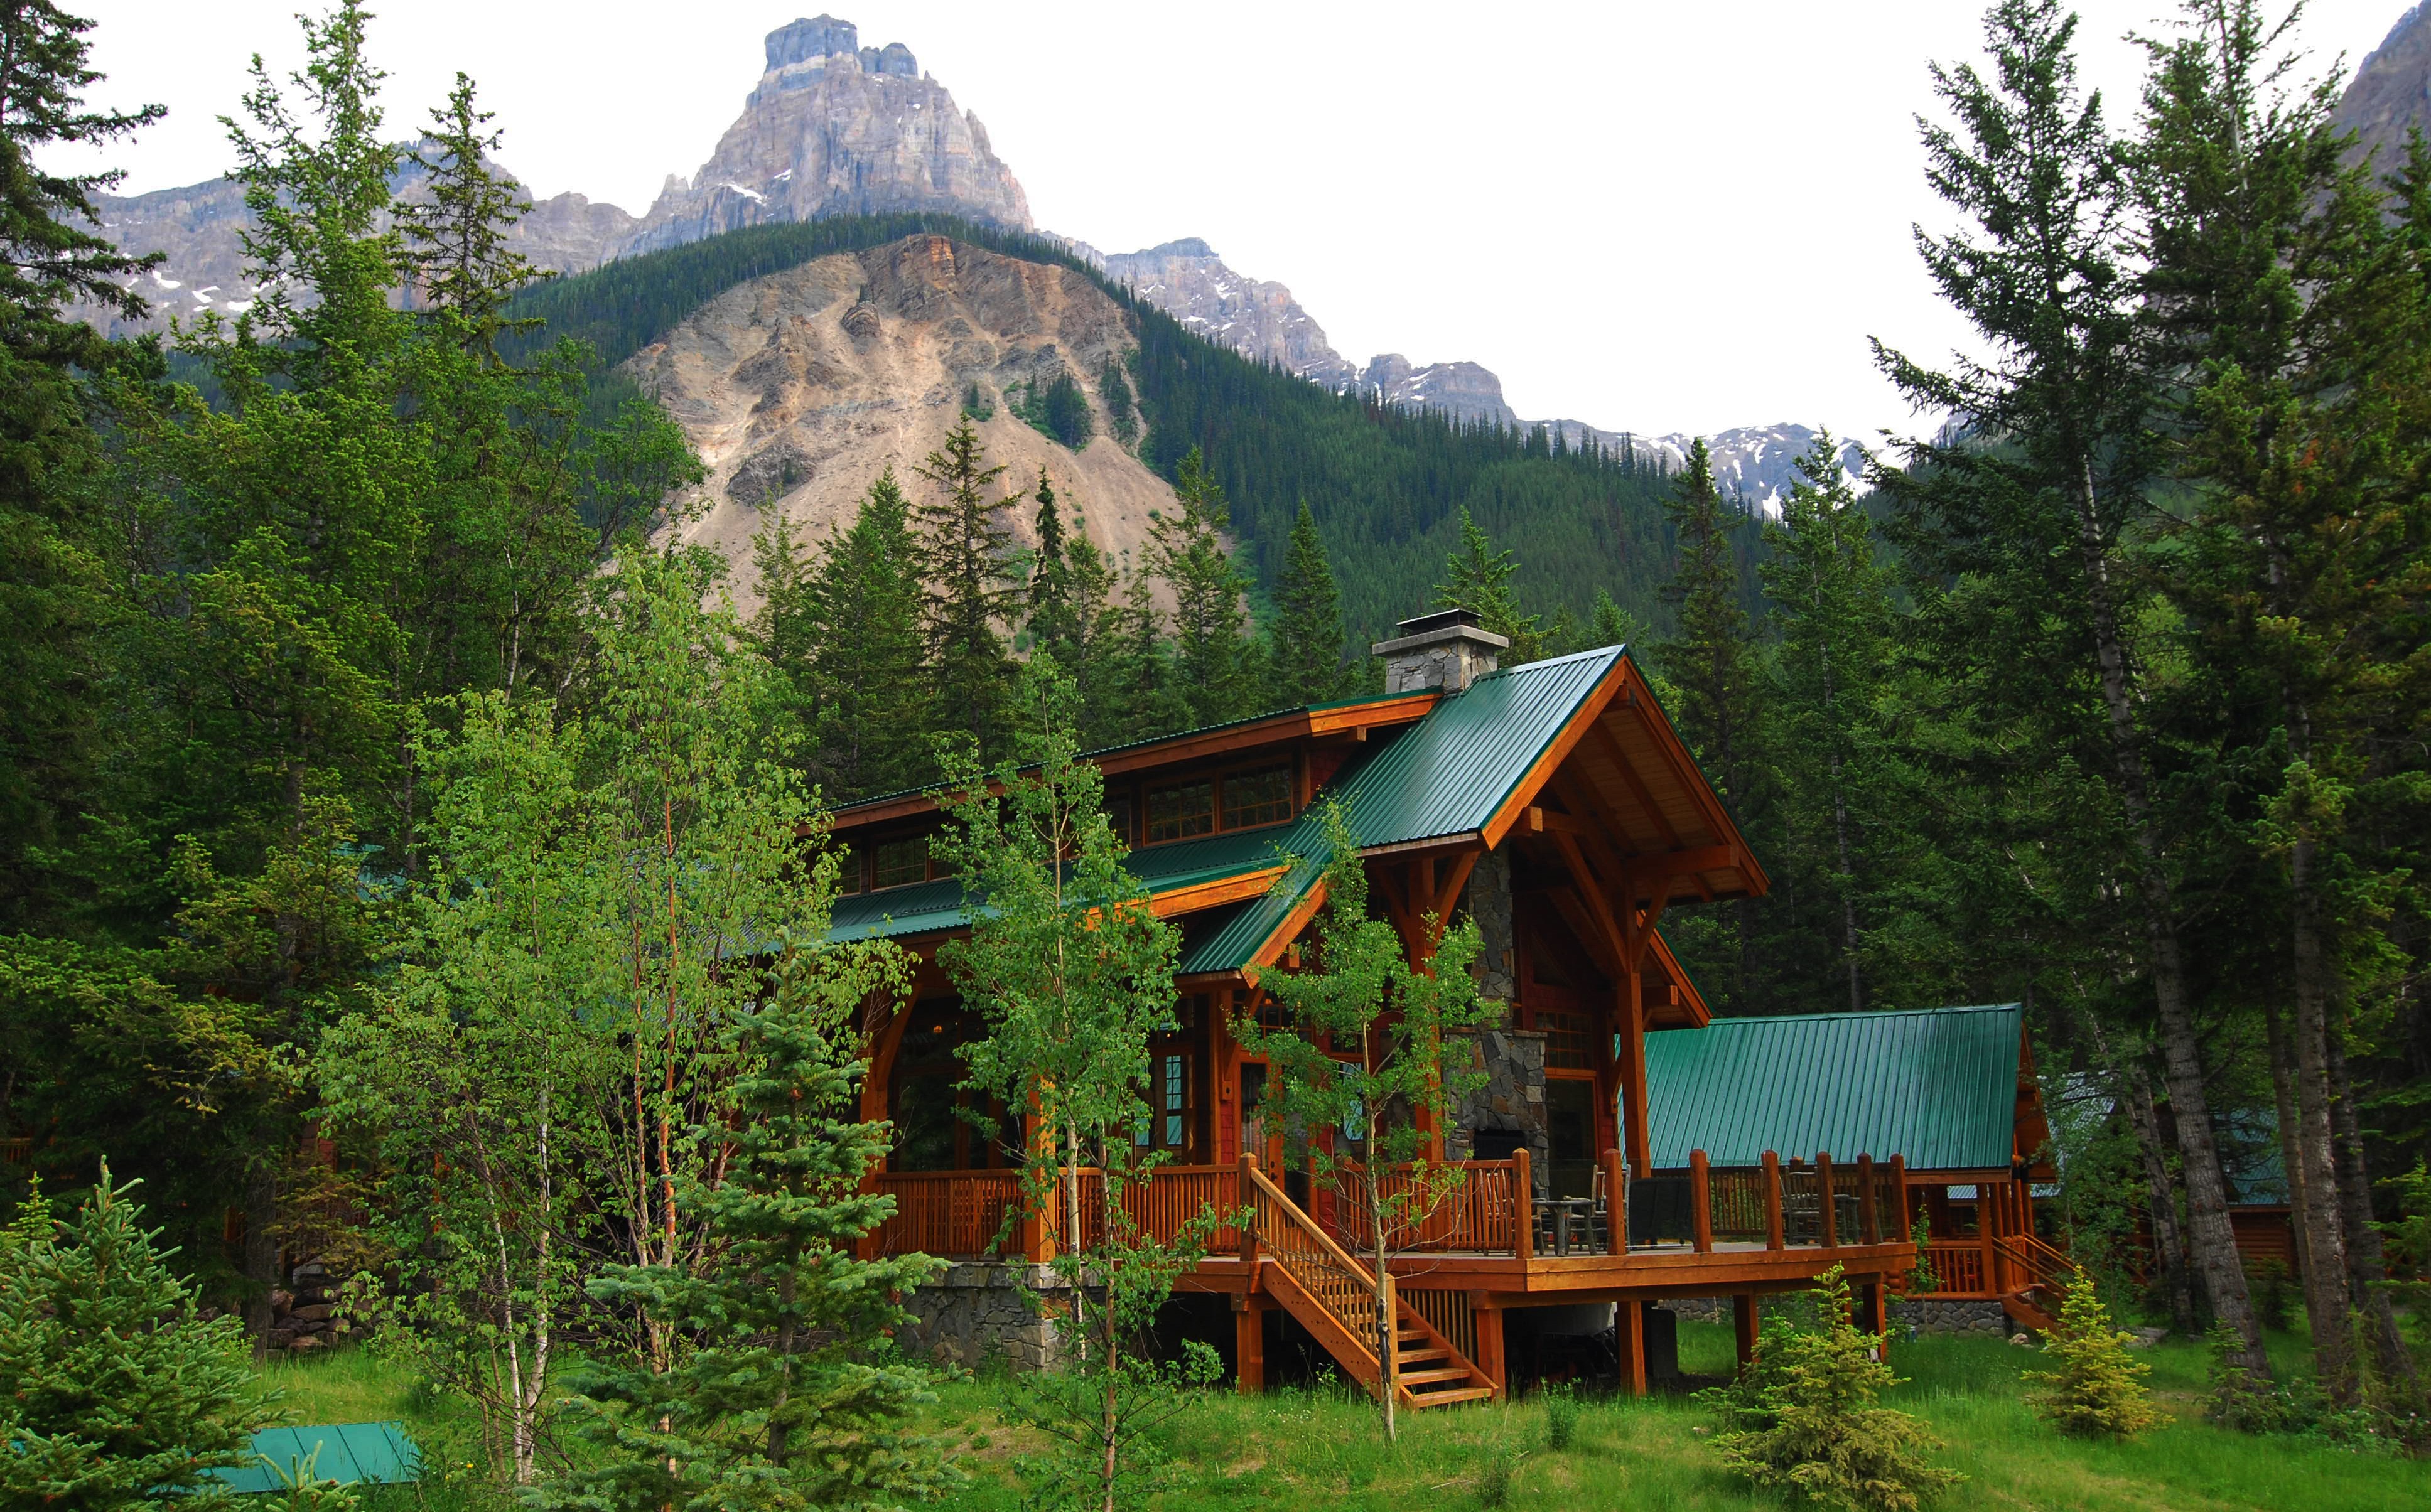 General 3872x2409 nature landscape mountains trees forest house Alberta Canada rocks wood